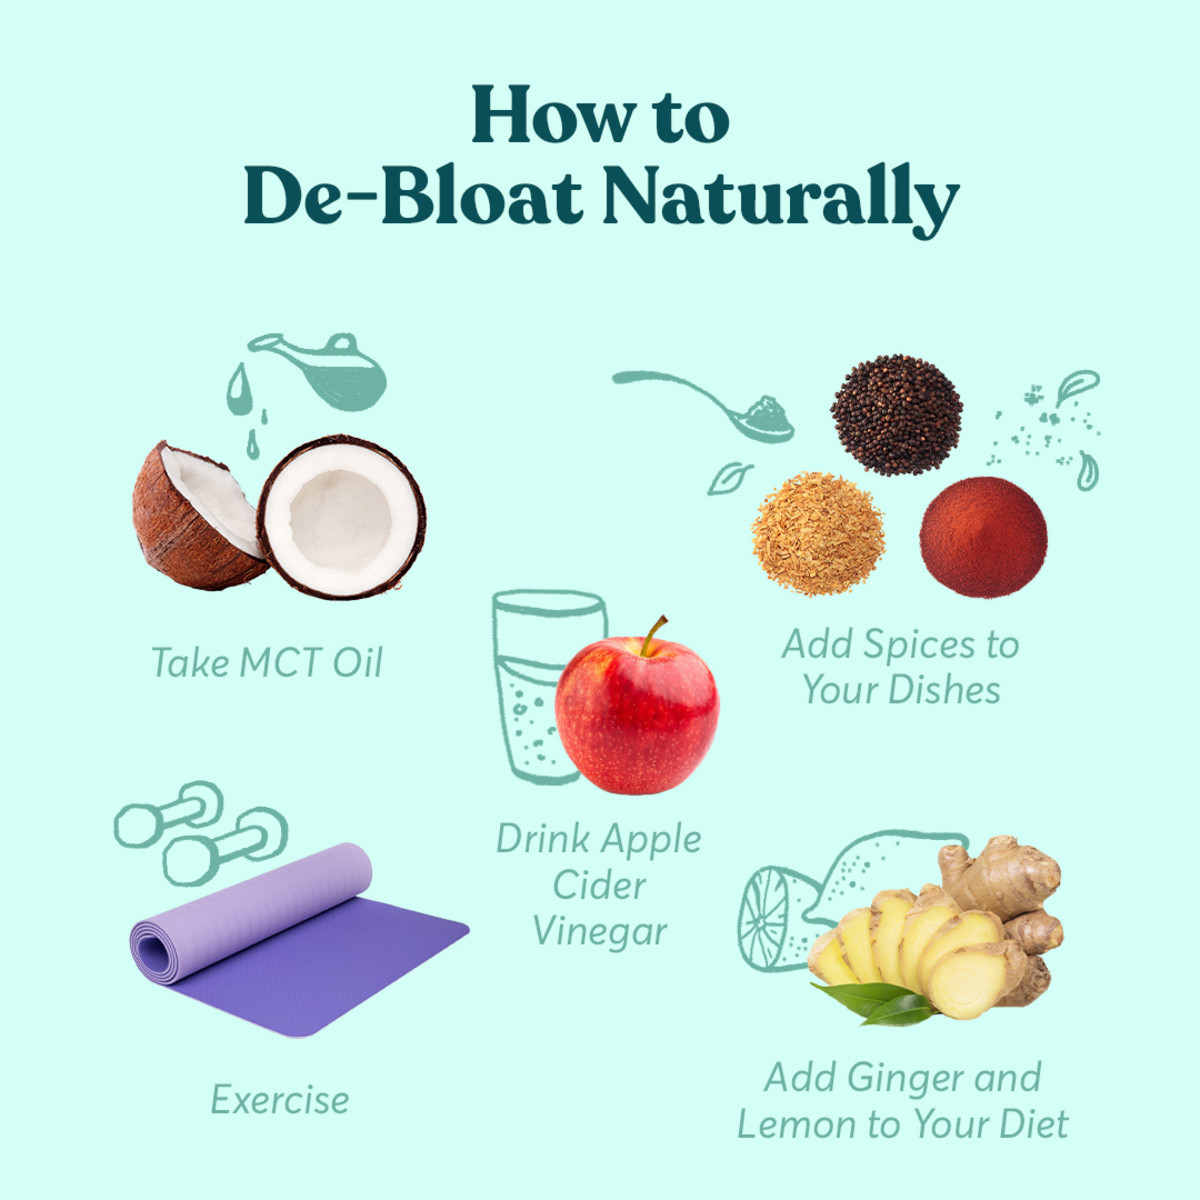 Tips to reduce bloating